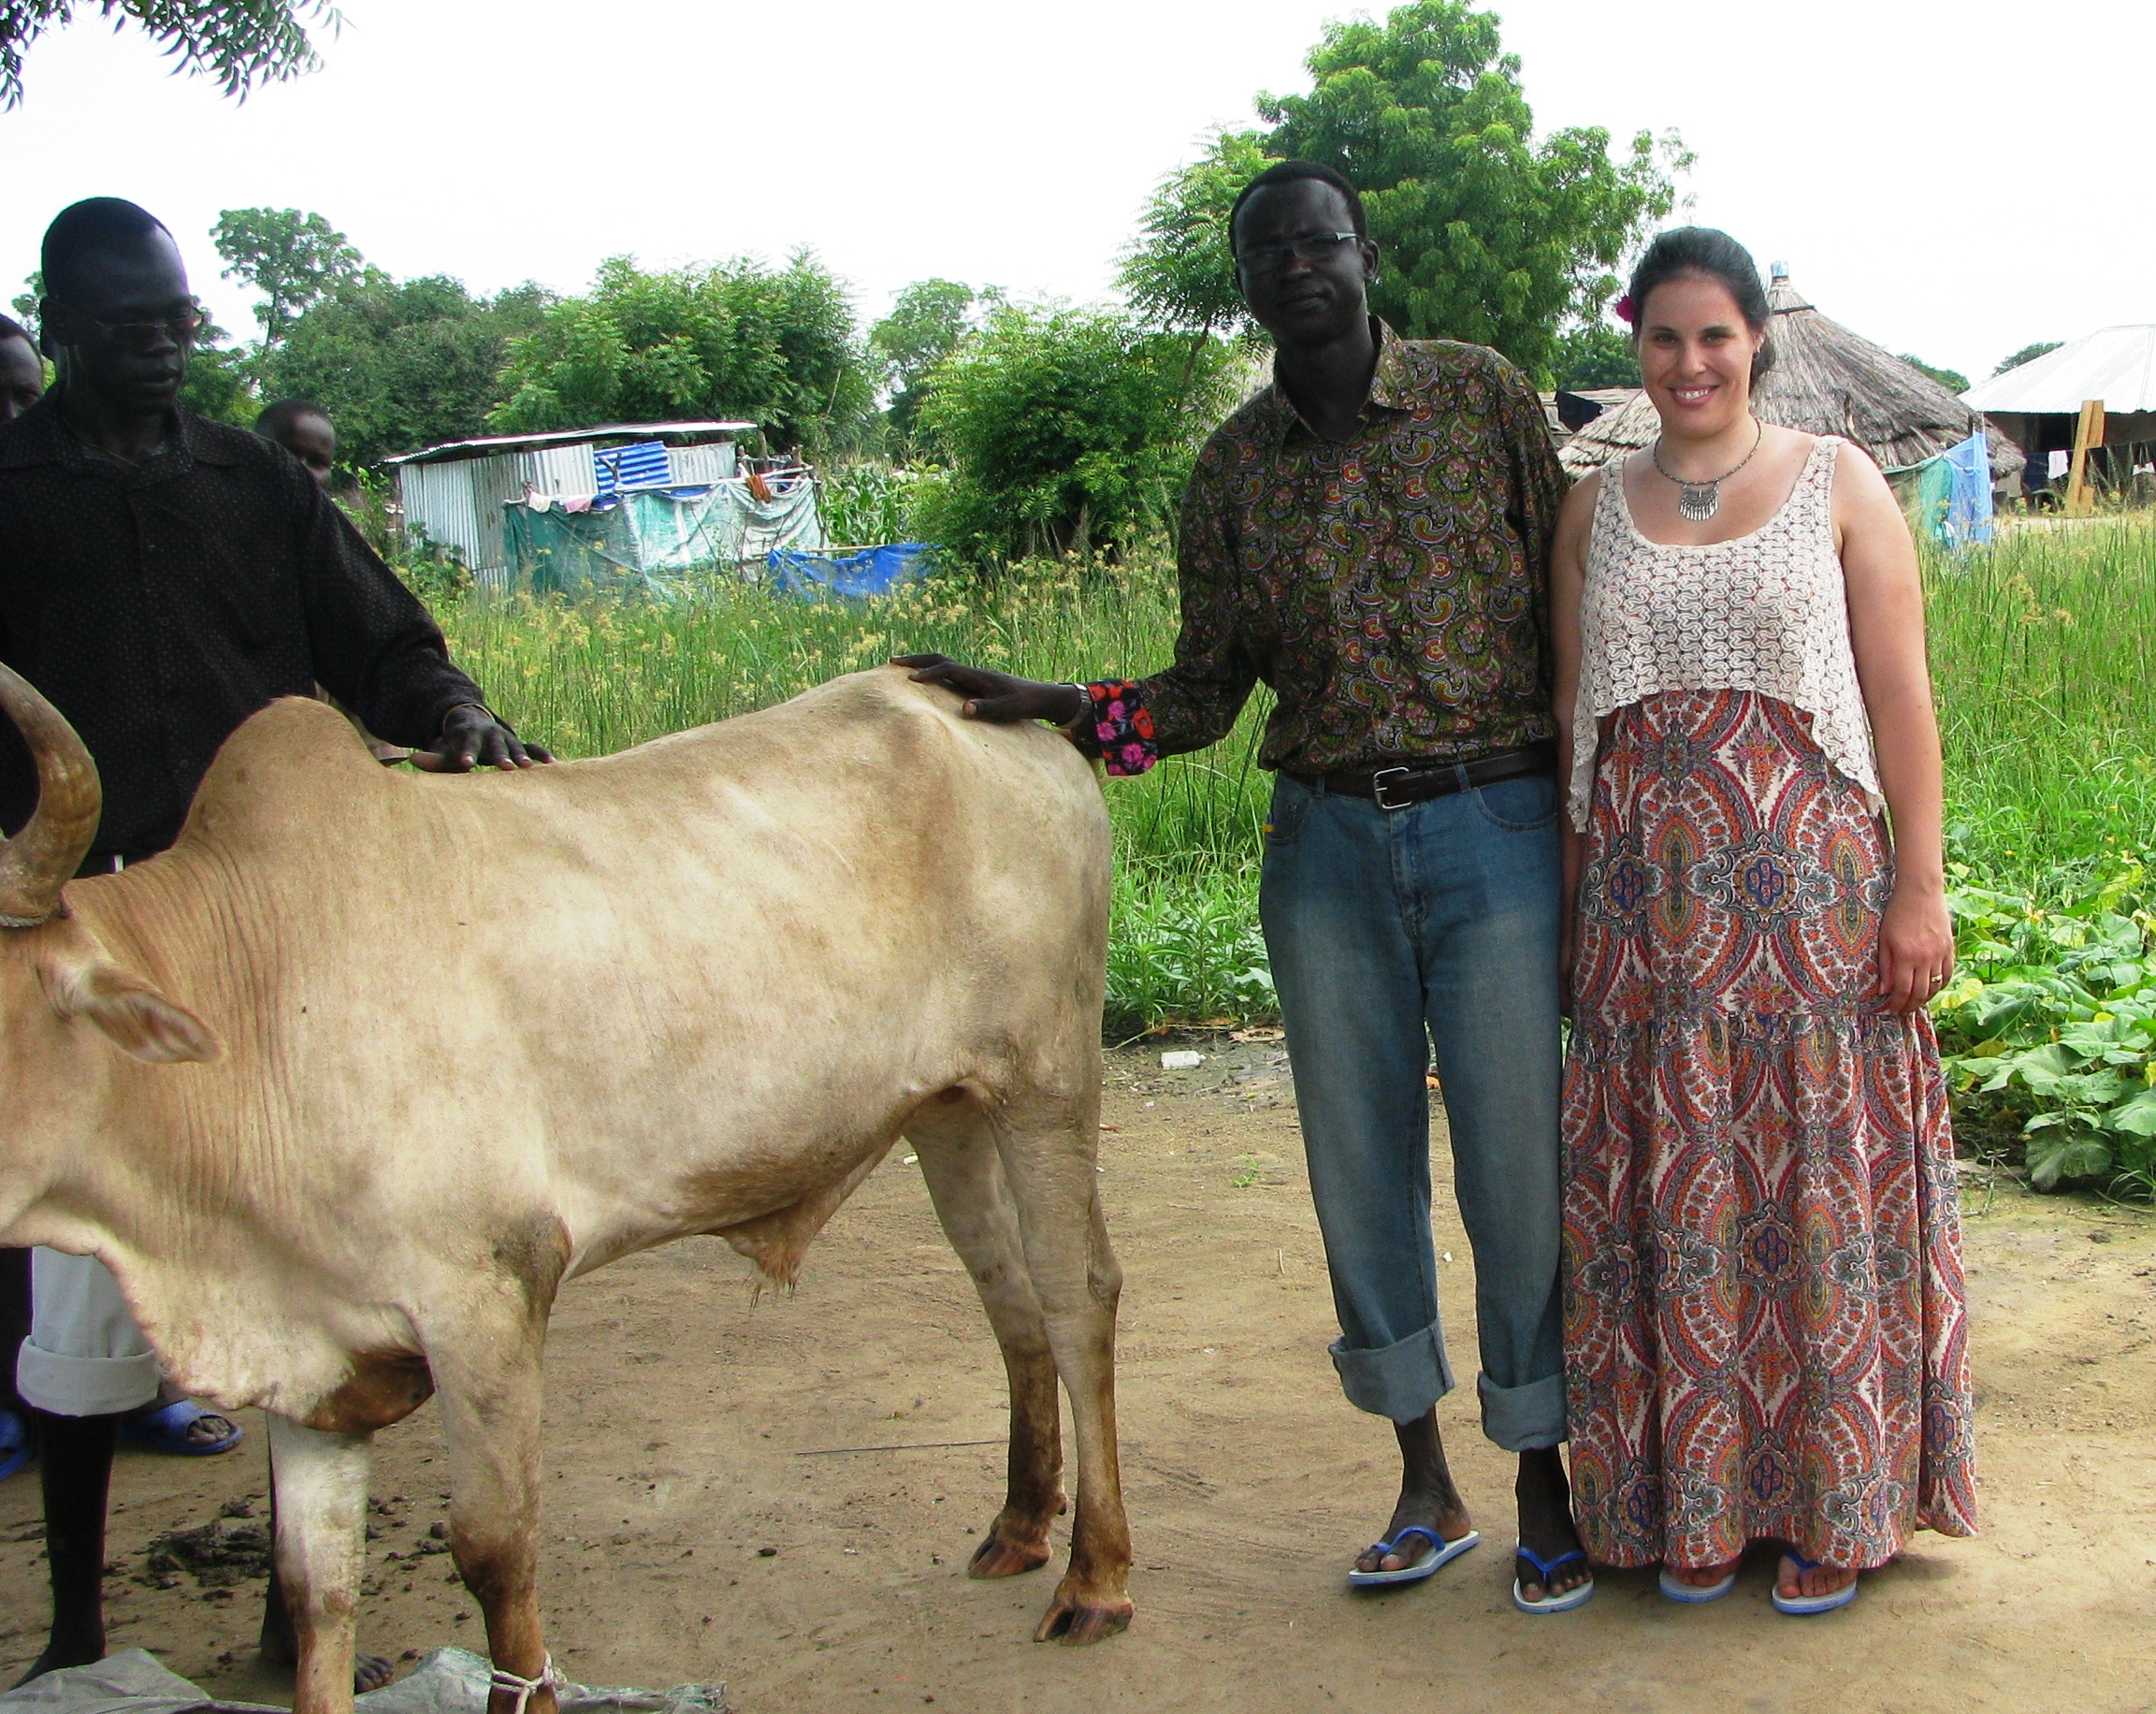 Nyok and Kathryn arriving ‘home’ in Bor, South Sudan 